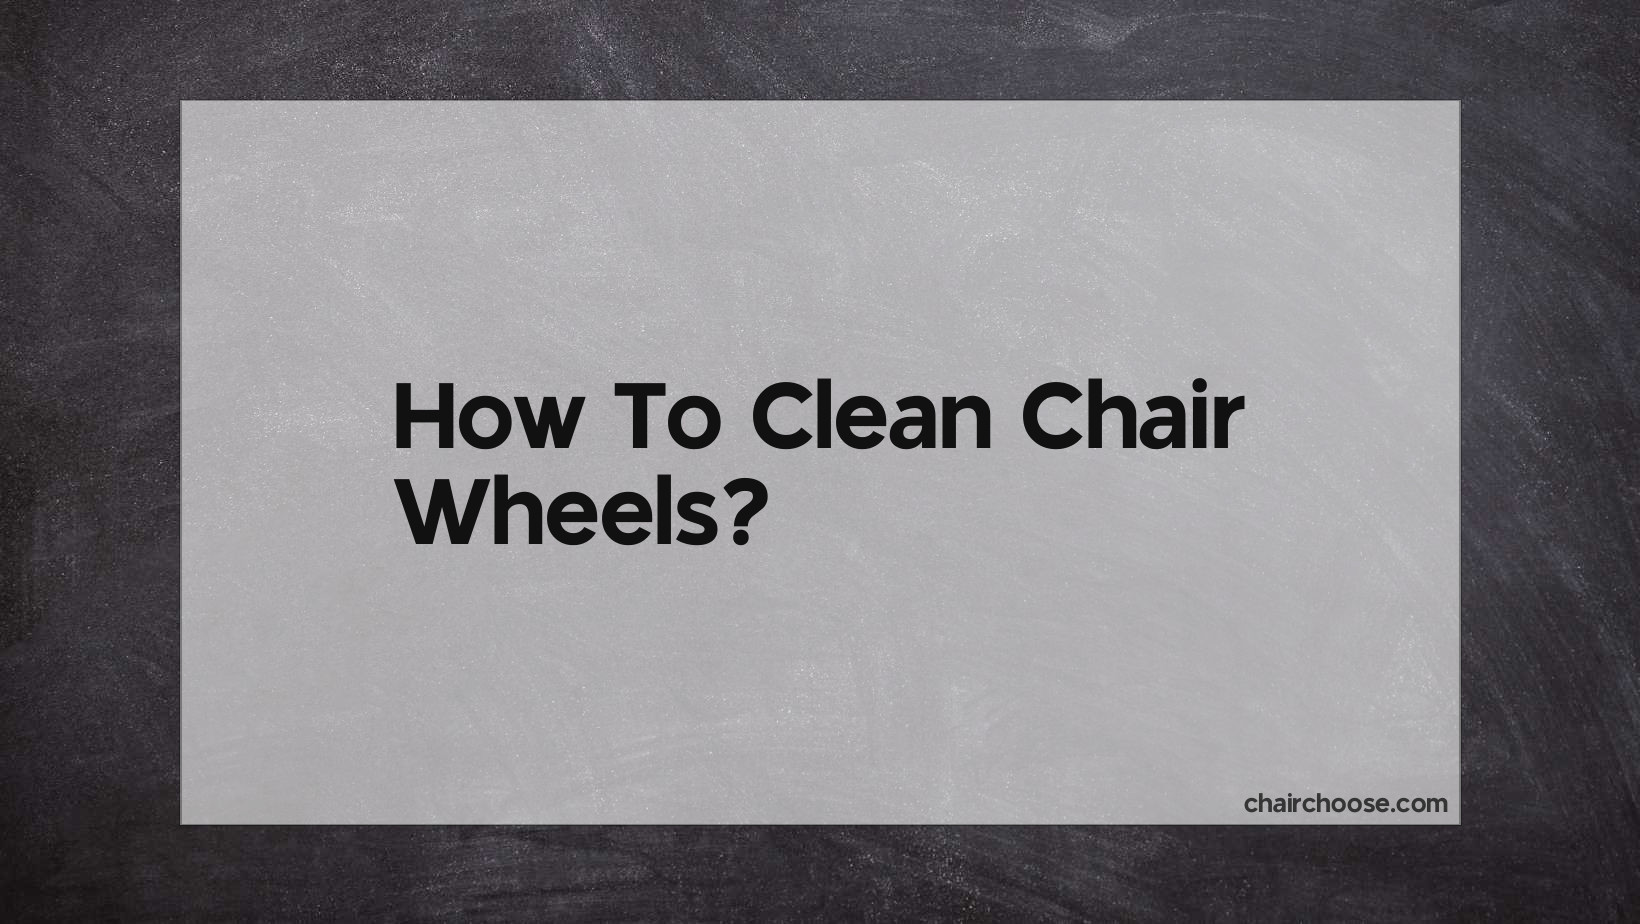 How To Clean Chair Wheels?